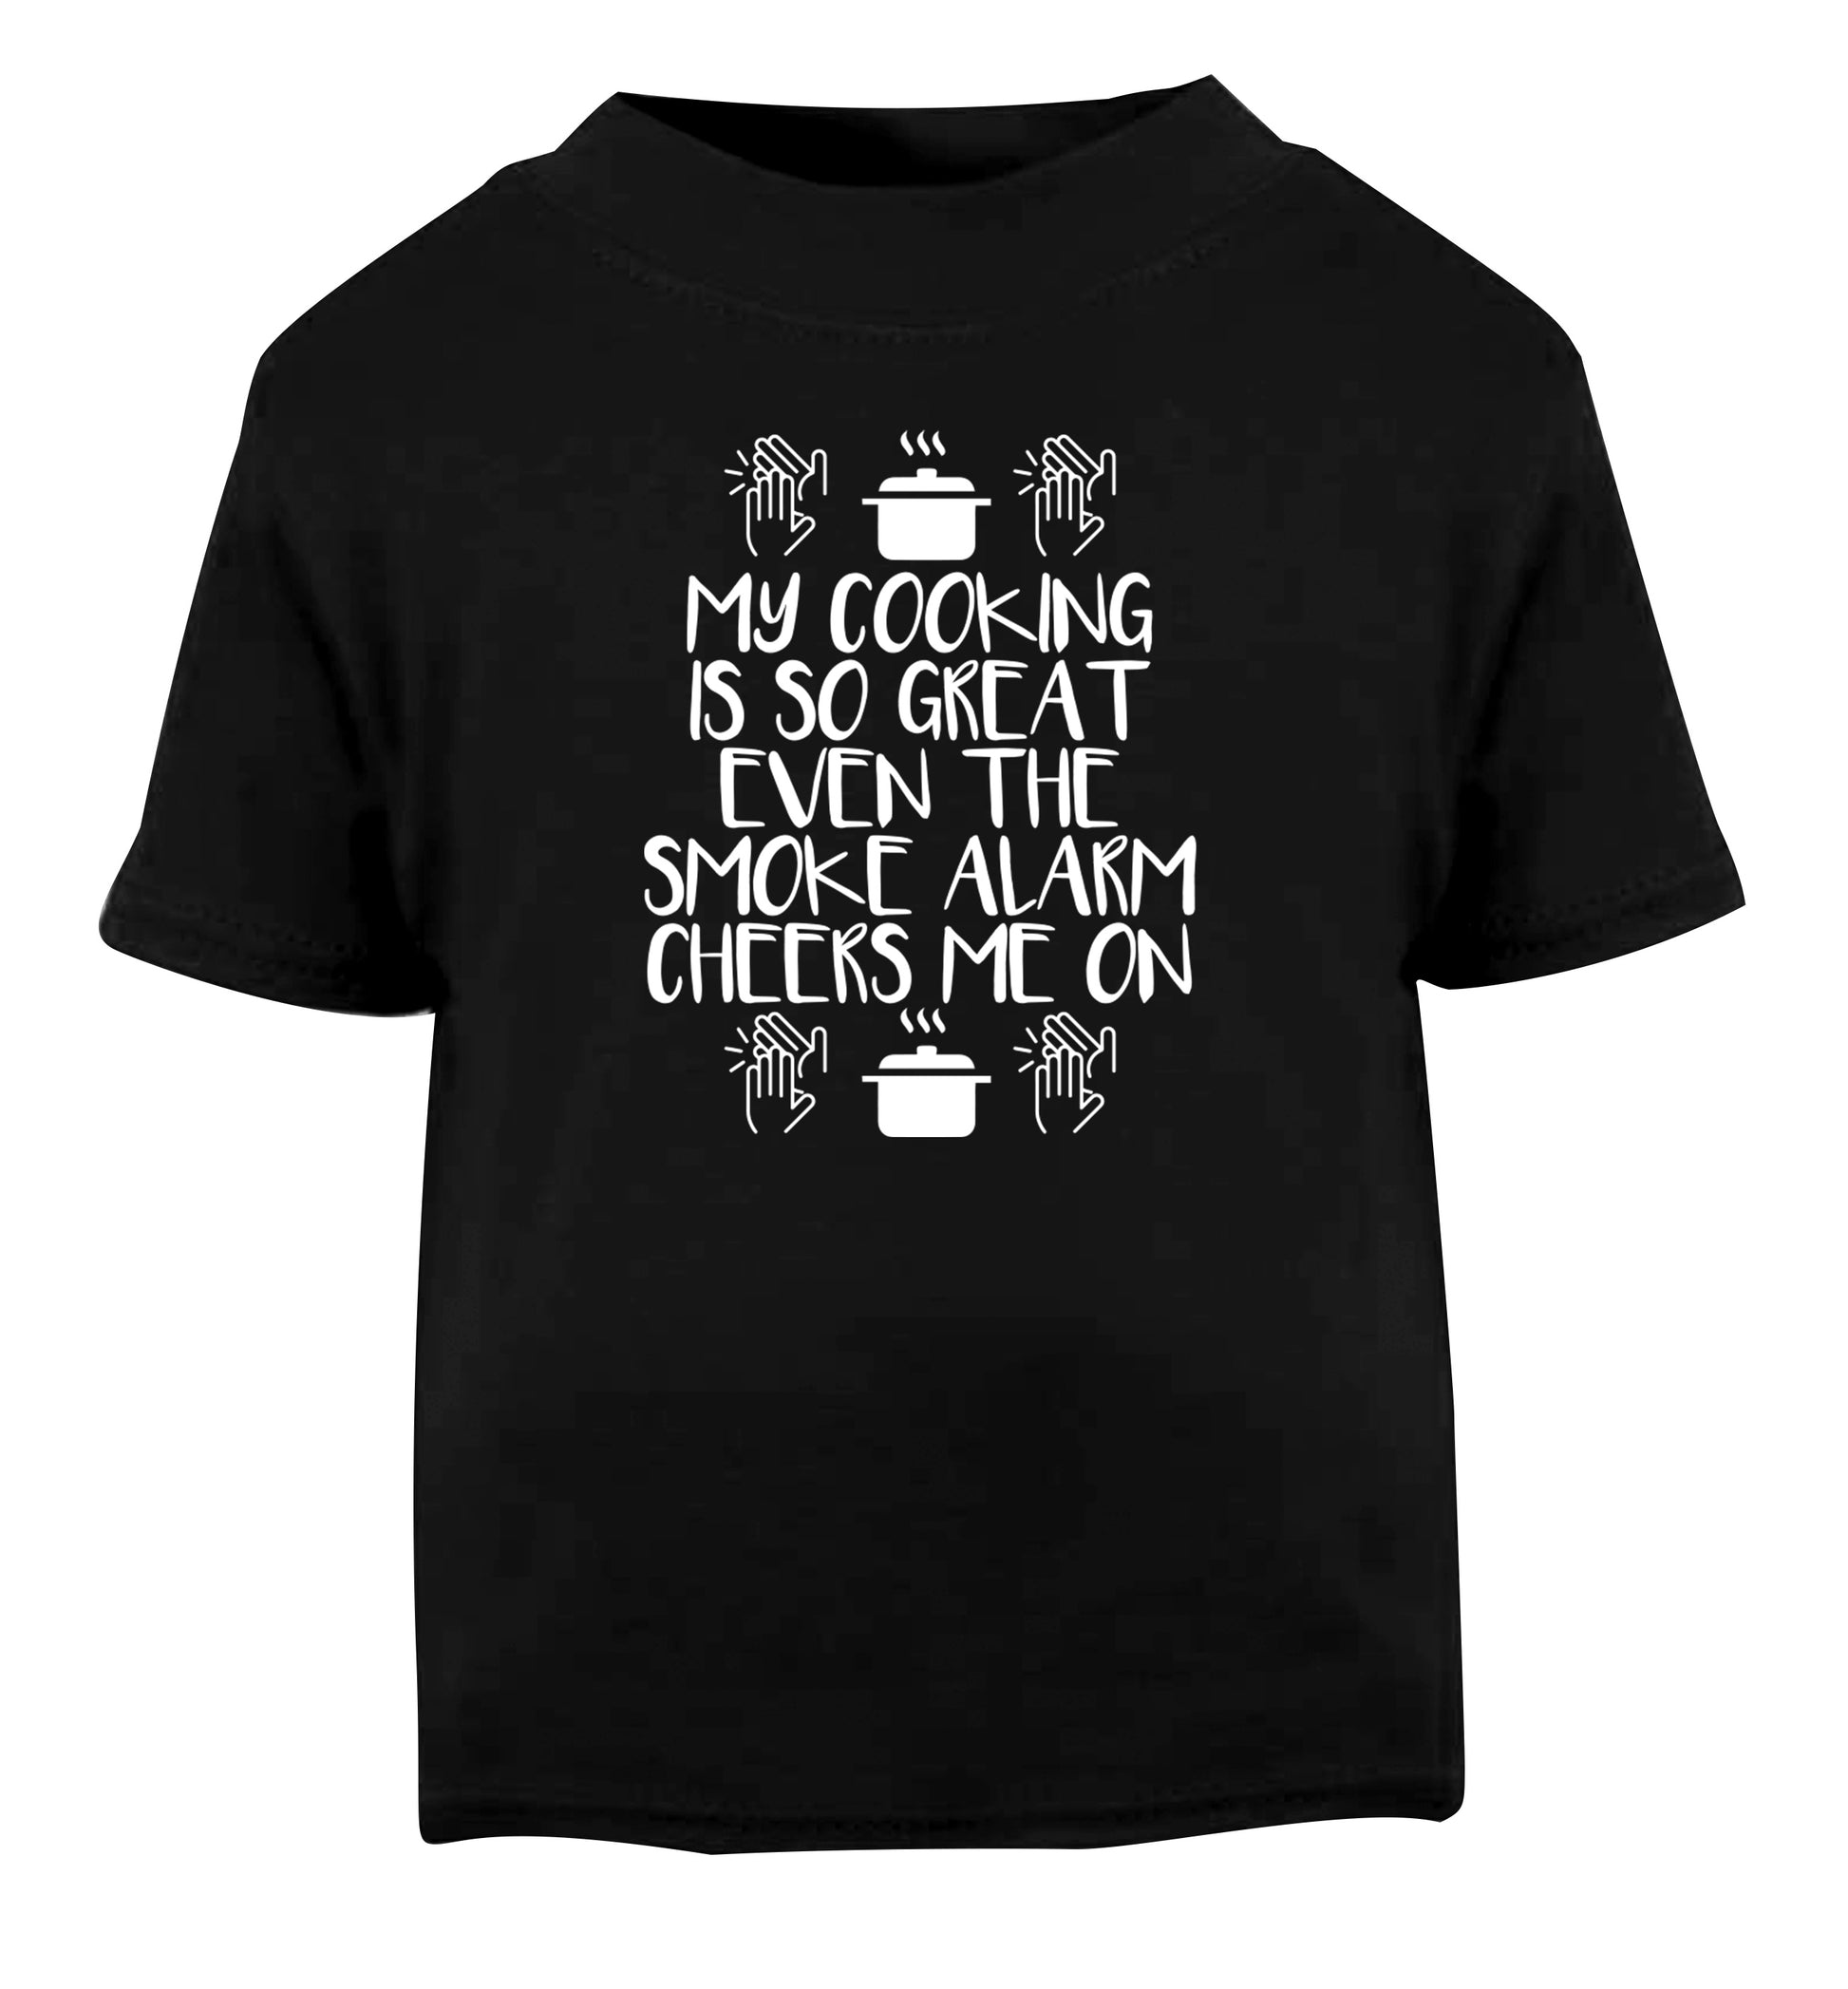 My cooking is so great even the smoke alarm cheers me on! Black Baby Toddler Tshirt 2 years